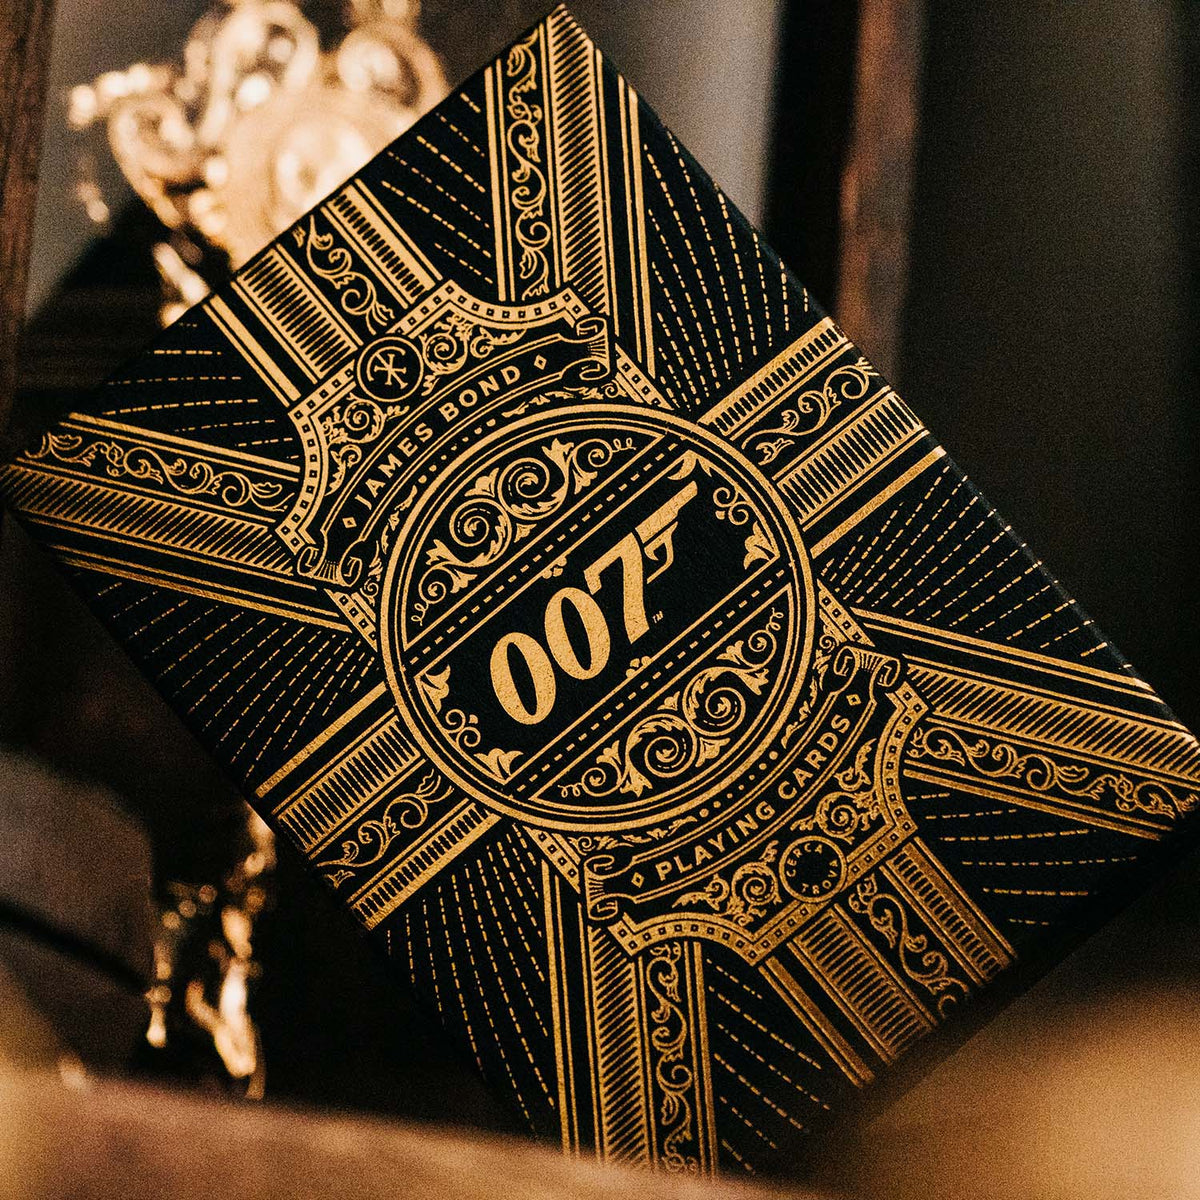 James Bond Playing Cards - By theory11 GAMES Theory 11 